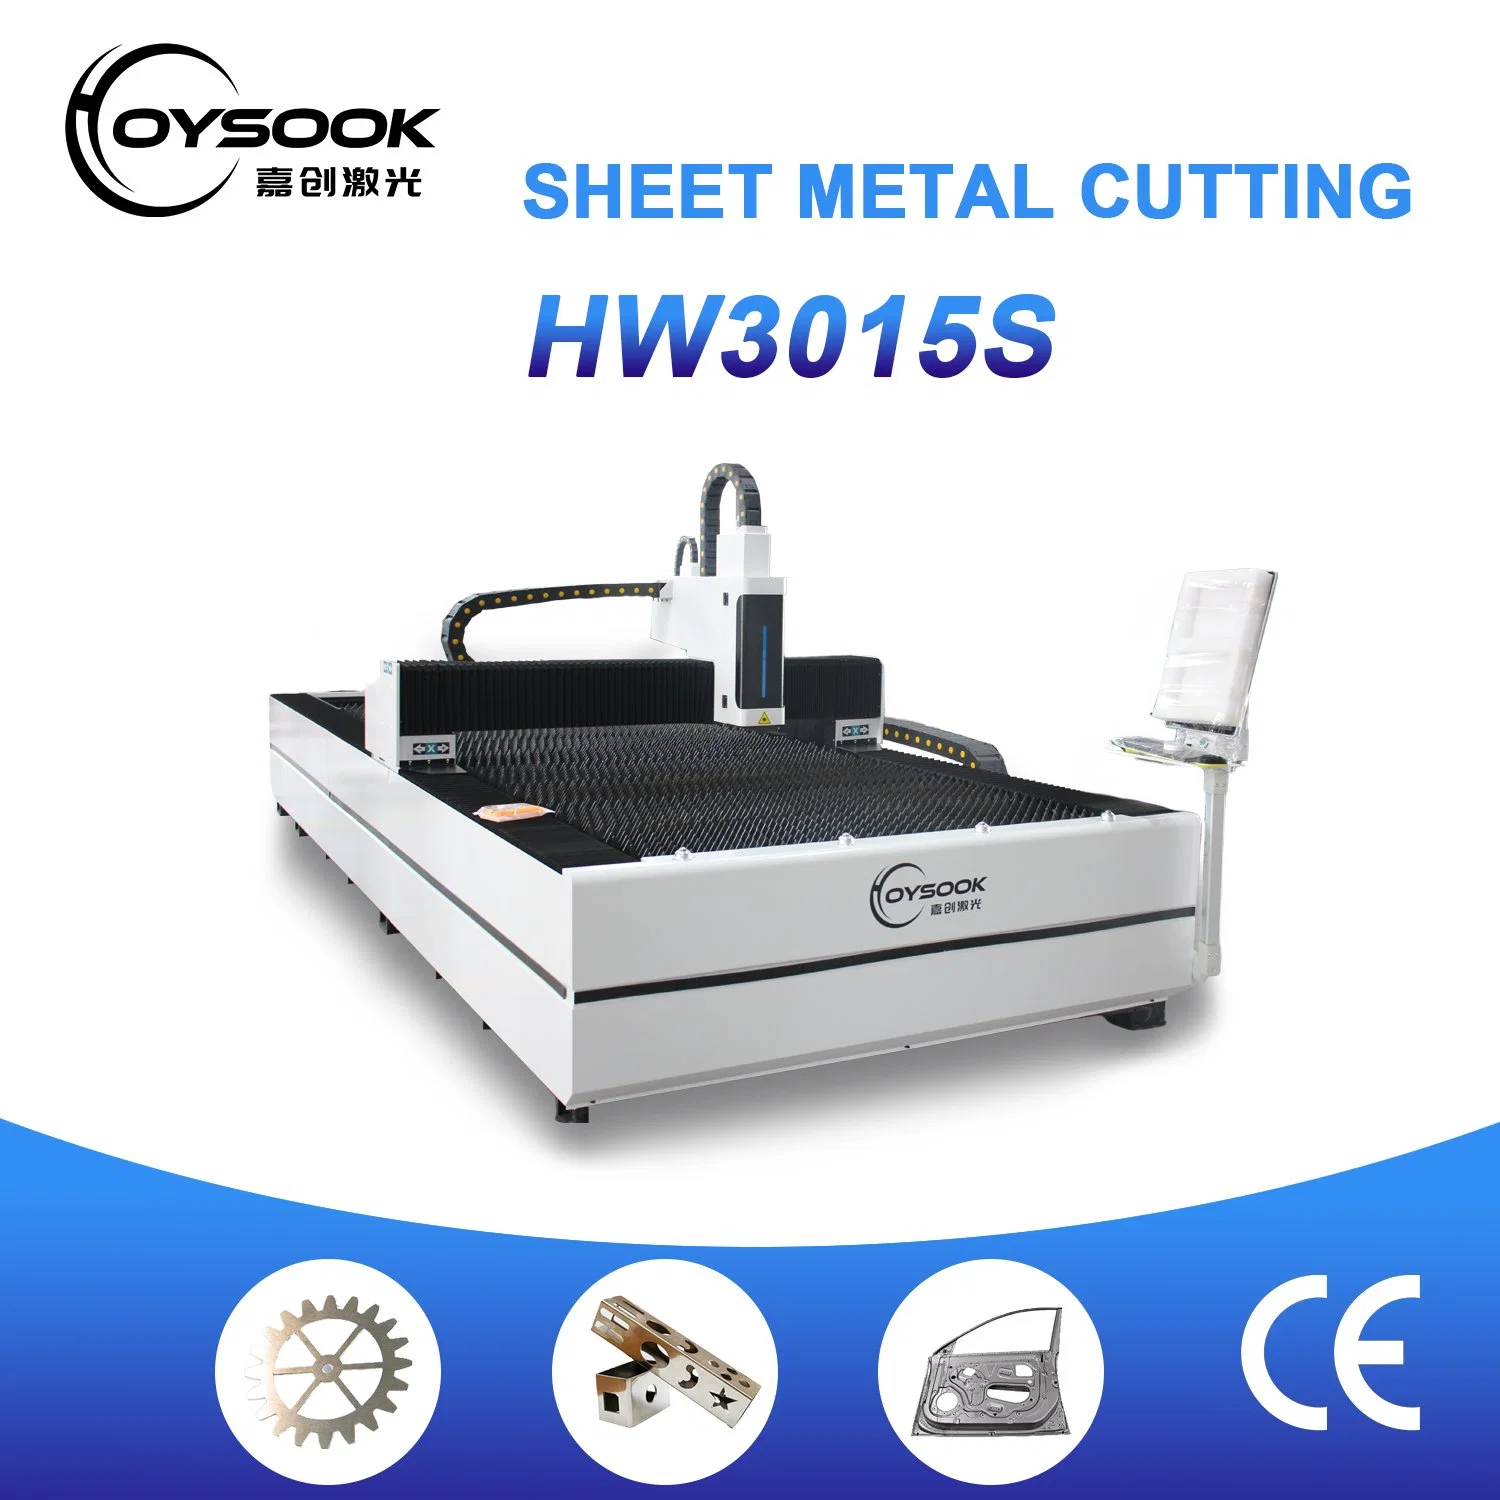 Metal Sheets Aluminum/Copper CNC Fiber Laser Cutting Machine Stainless Kitchenware Products